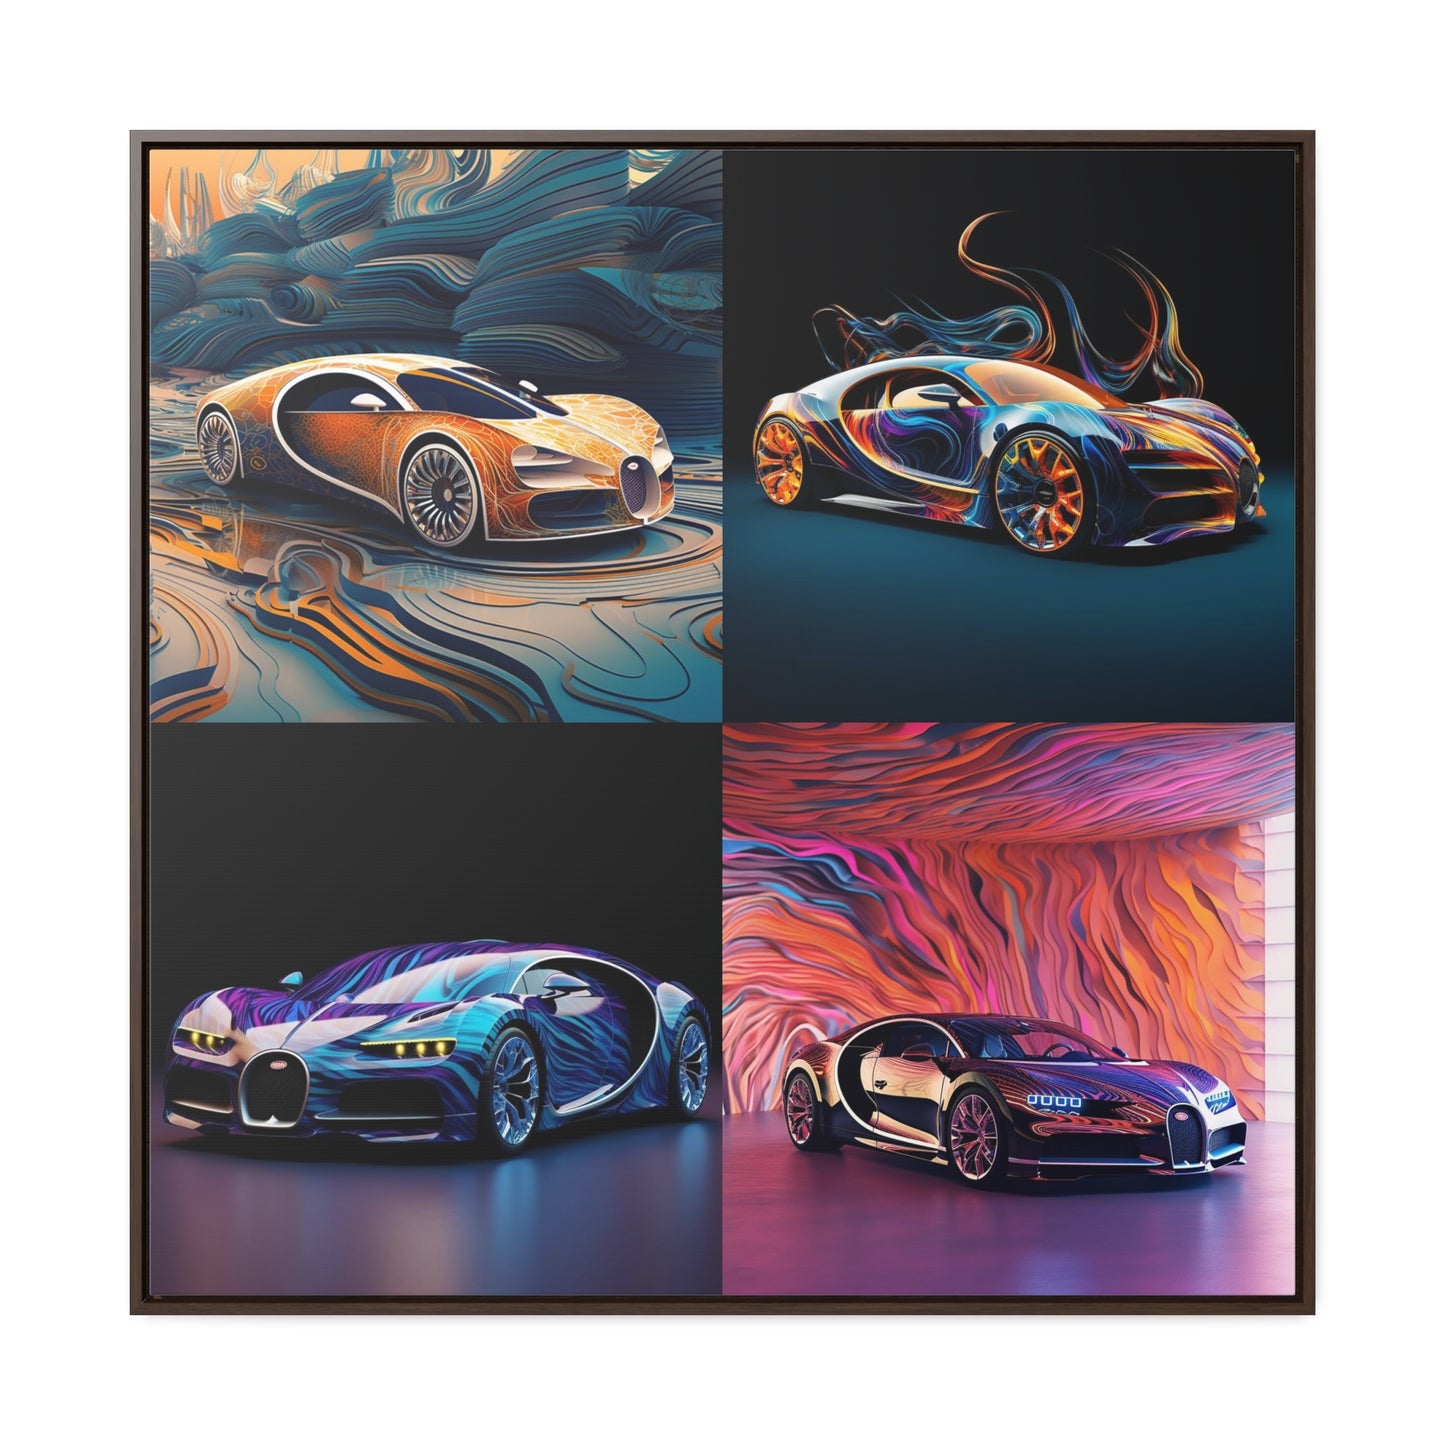 Gallery Canvas Wraps, Square Frame Bugatti Abstract Flair 5